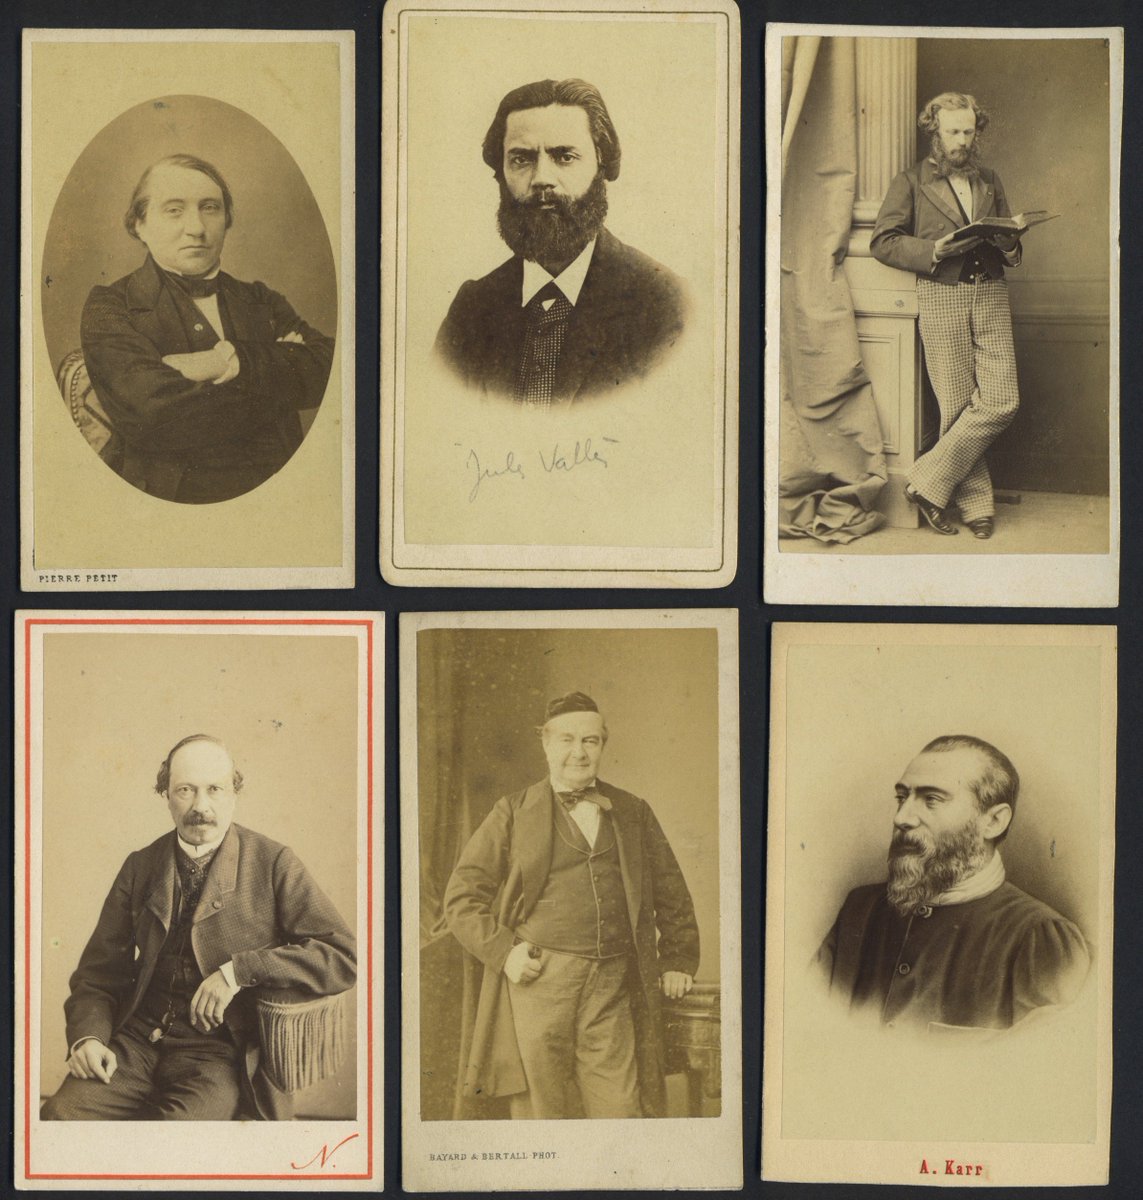 Schubertiade Music On Twitter A Nice Little Group Of Cartedevisite Photographs Of French Authors Of The 19th Century We Re Particularly Partial To Arsenehoussaye Upper Right With His Spiffy Facial Hair And Checked